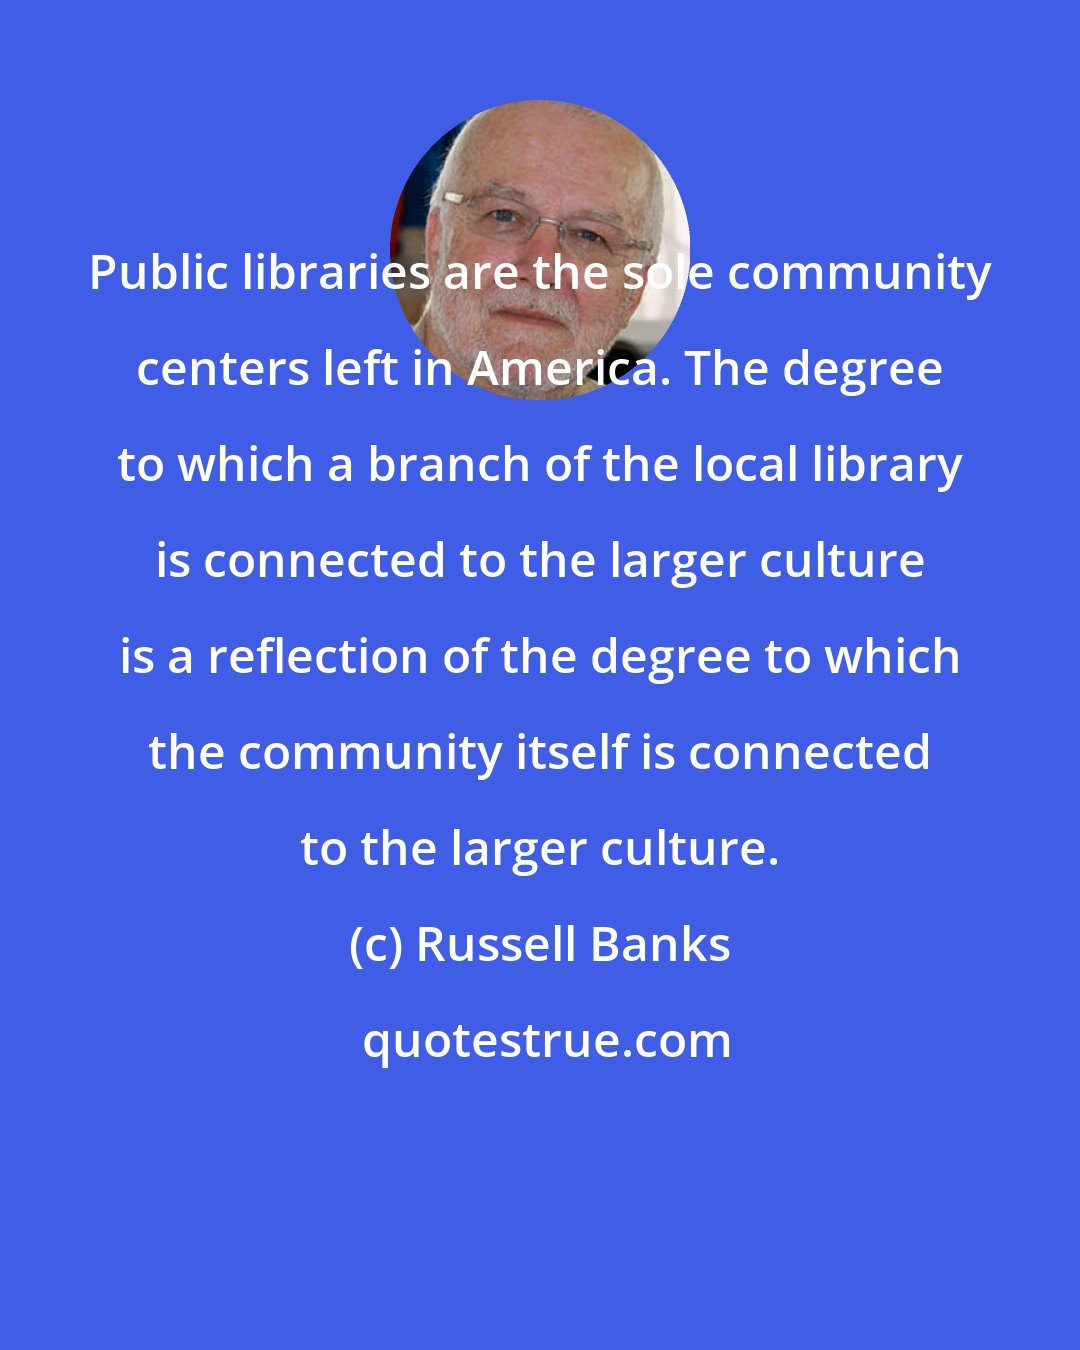 Russell Banks: Public libraries are the sole community centers left in America. The degree to which a branch of the local library is connected to the larger culture is a reflection of the degree to which the community itself is connected to the larger culture.